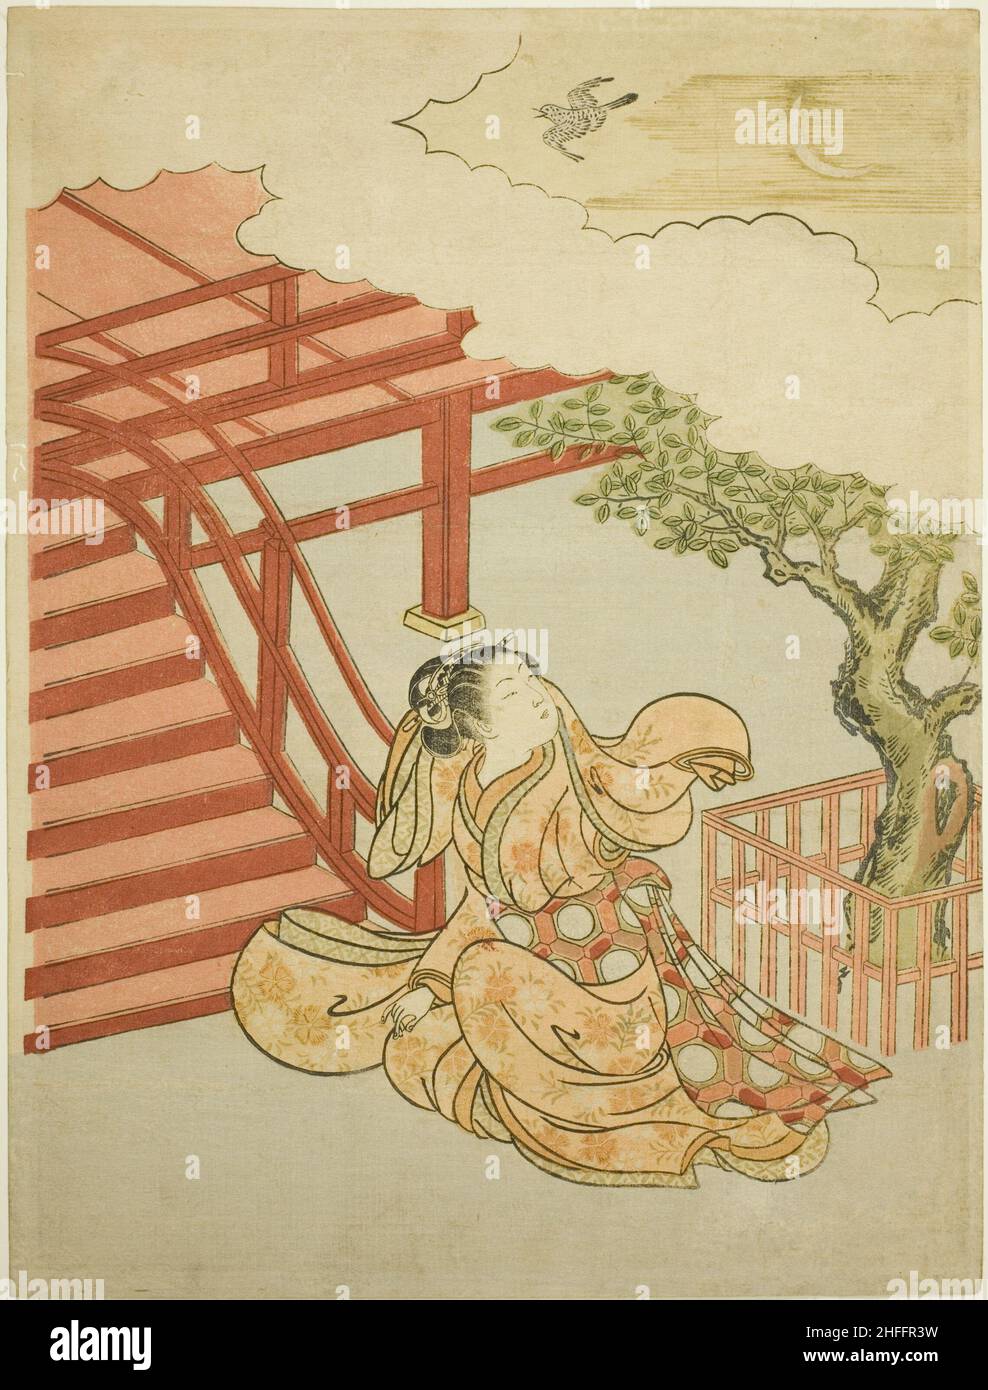 The Call of the Cuckoo from above the Clouds (parody of Minamoto no Yorimasa), c. 1766. Stock Photo